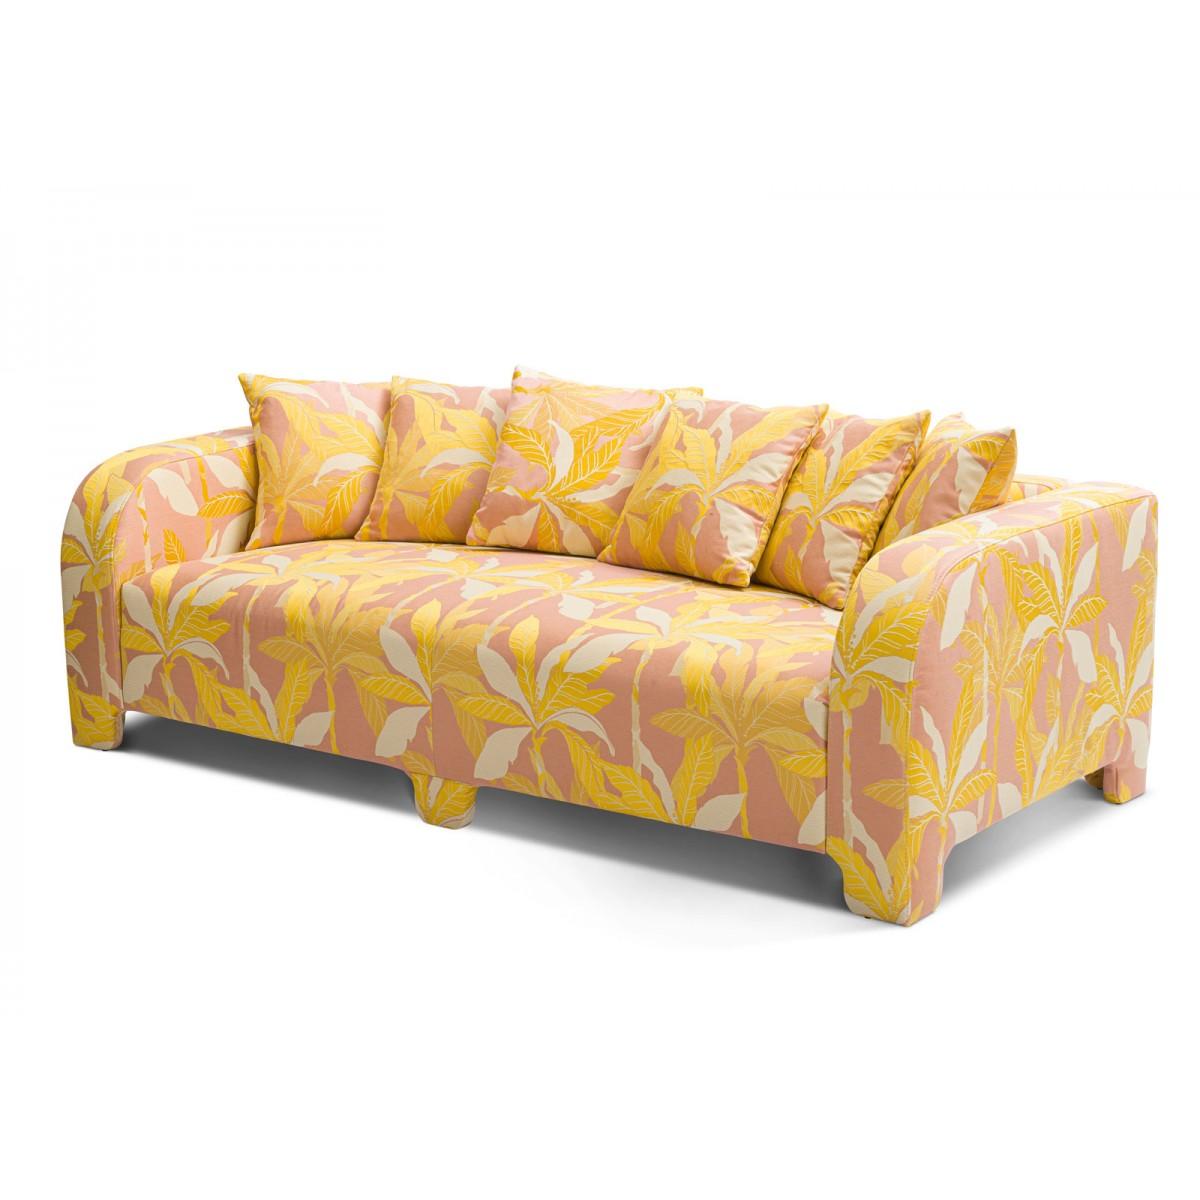 Popus Editions Graziella 2 Seater Sofa in Pink Miami Jacquard Fabric

A foot that hides another. A cushion that hides another. A curve that hides another with contemporary lines and a base like a punctuation mark, this sofa gives pride of place to